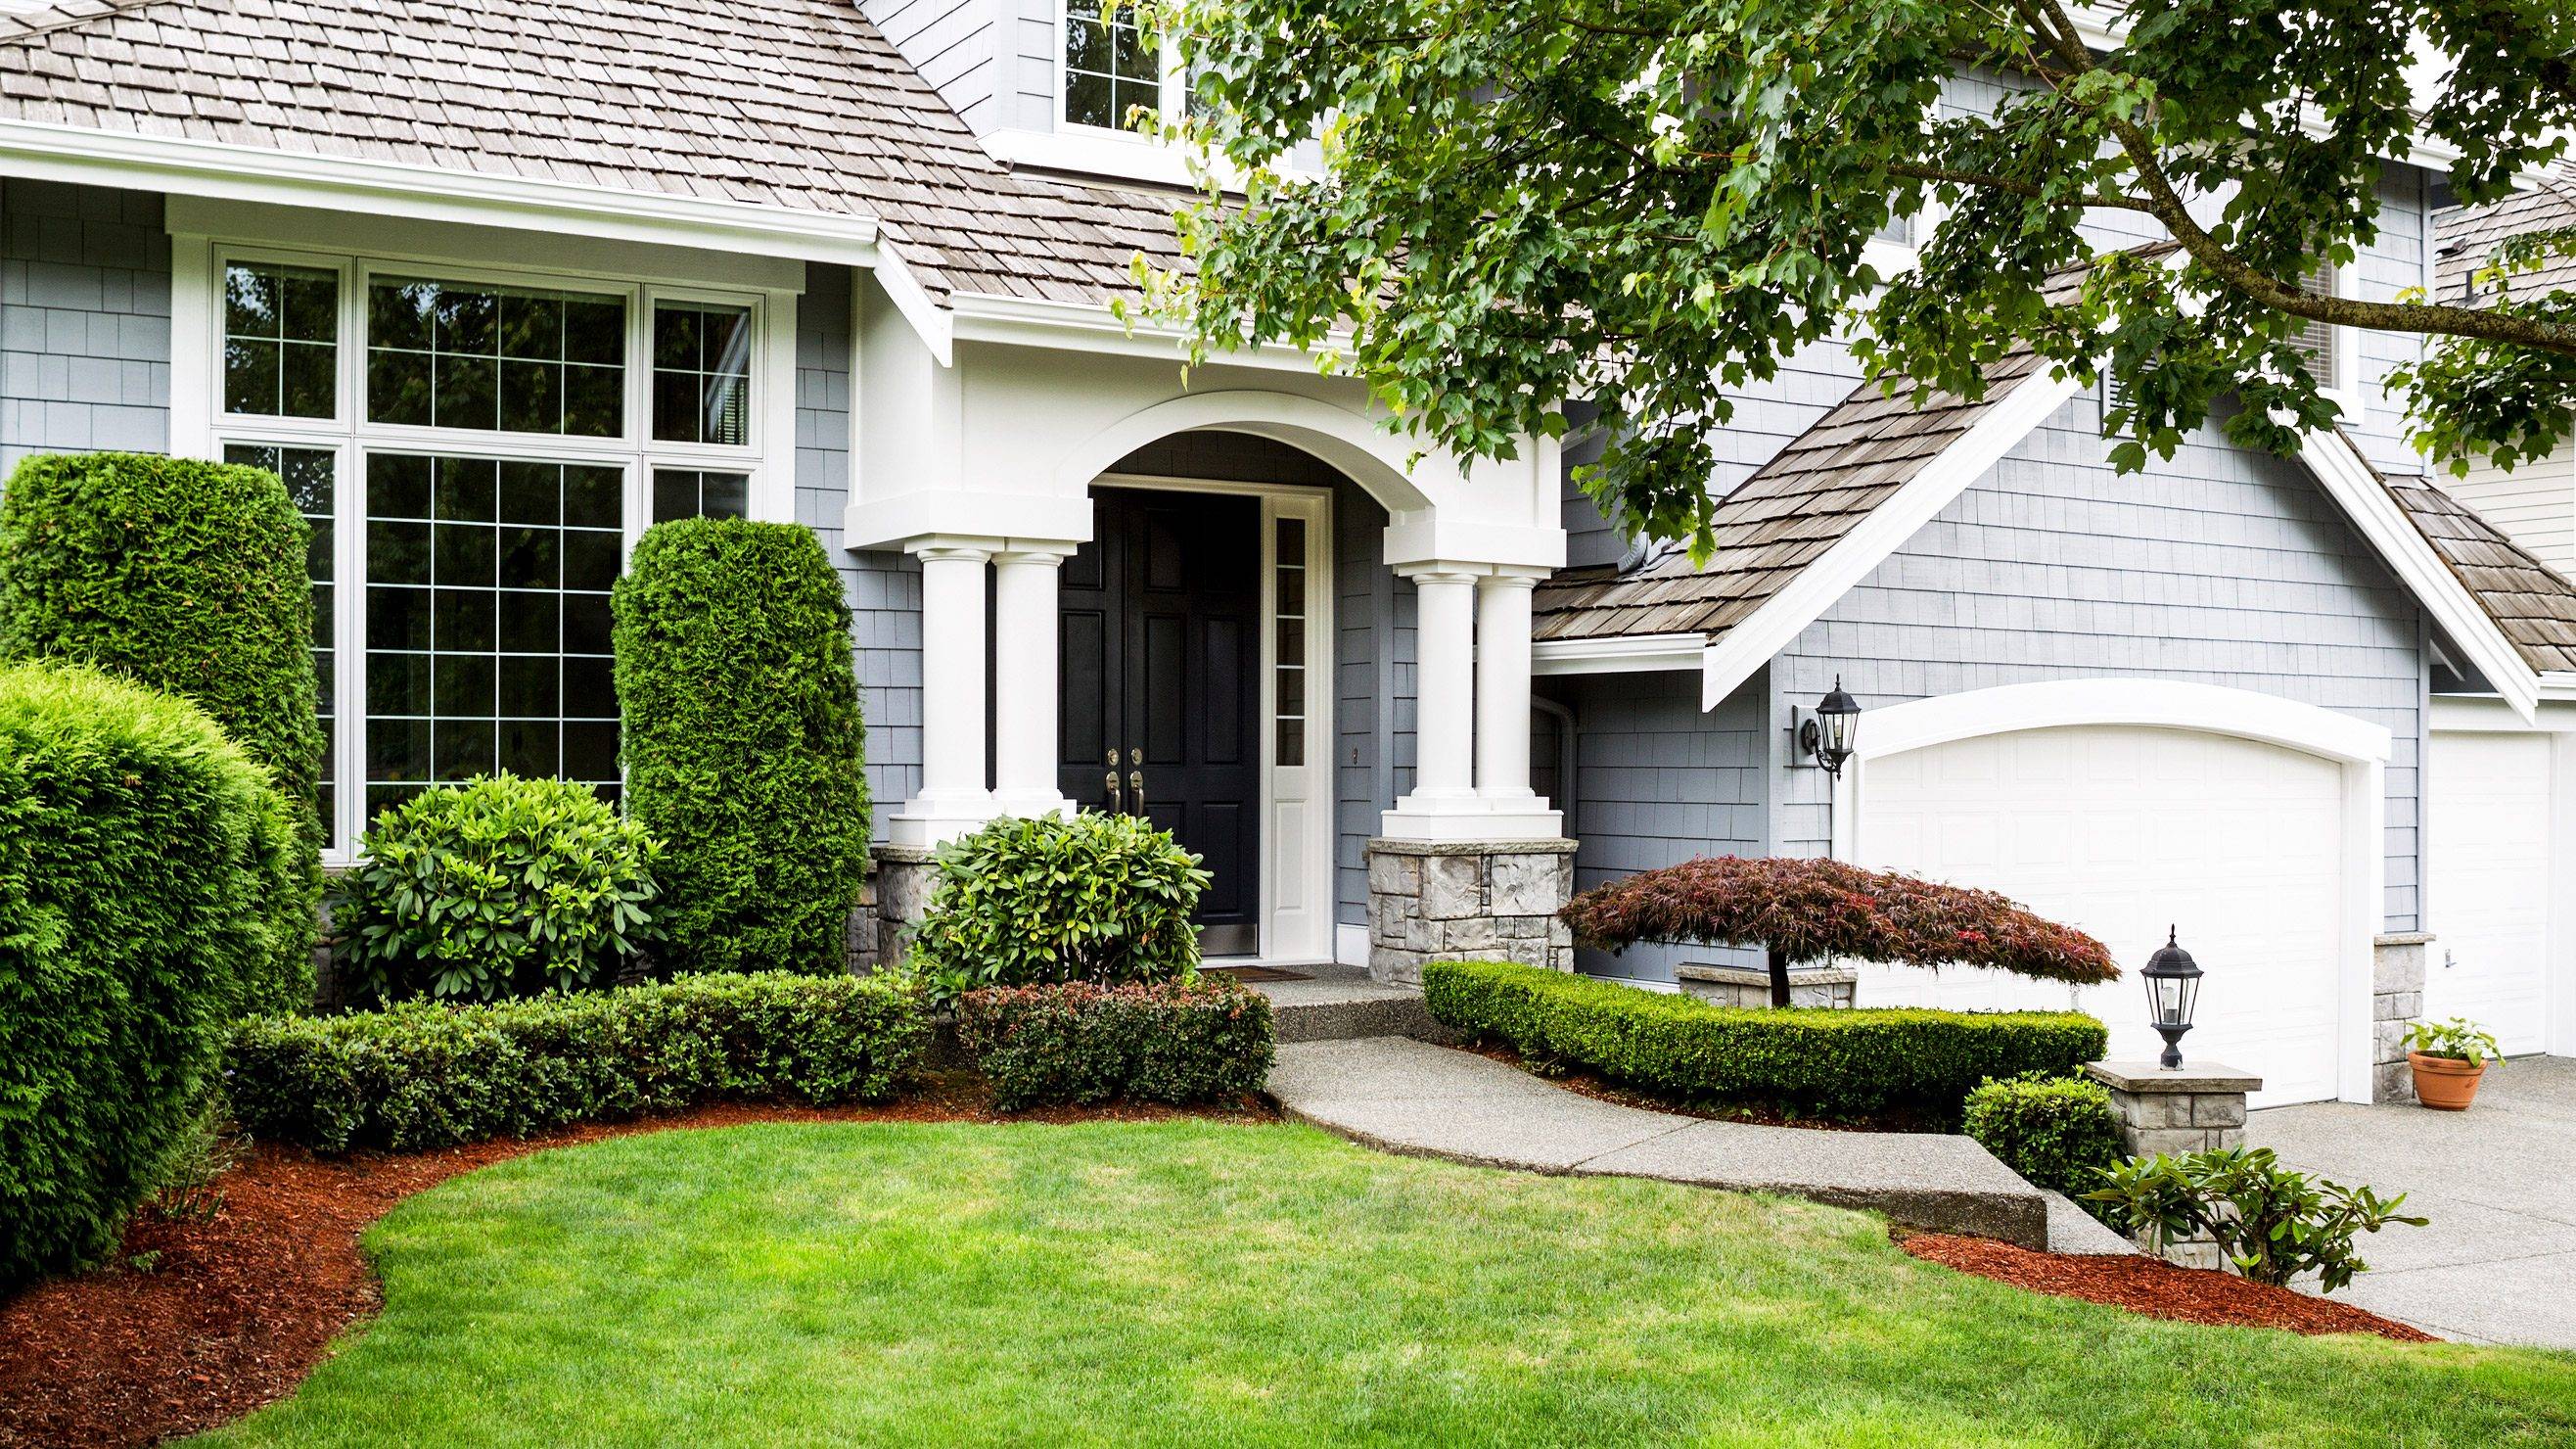 Pretty Small Front Yard Landscaping Ideas